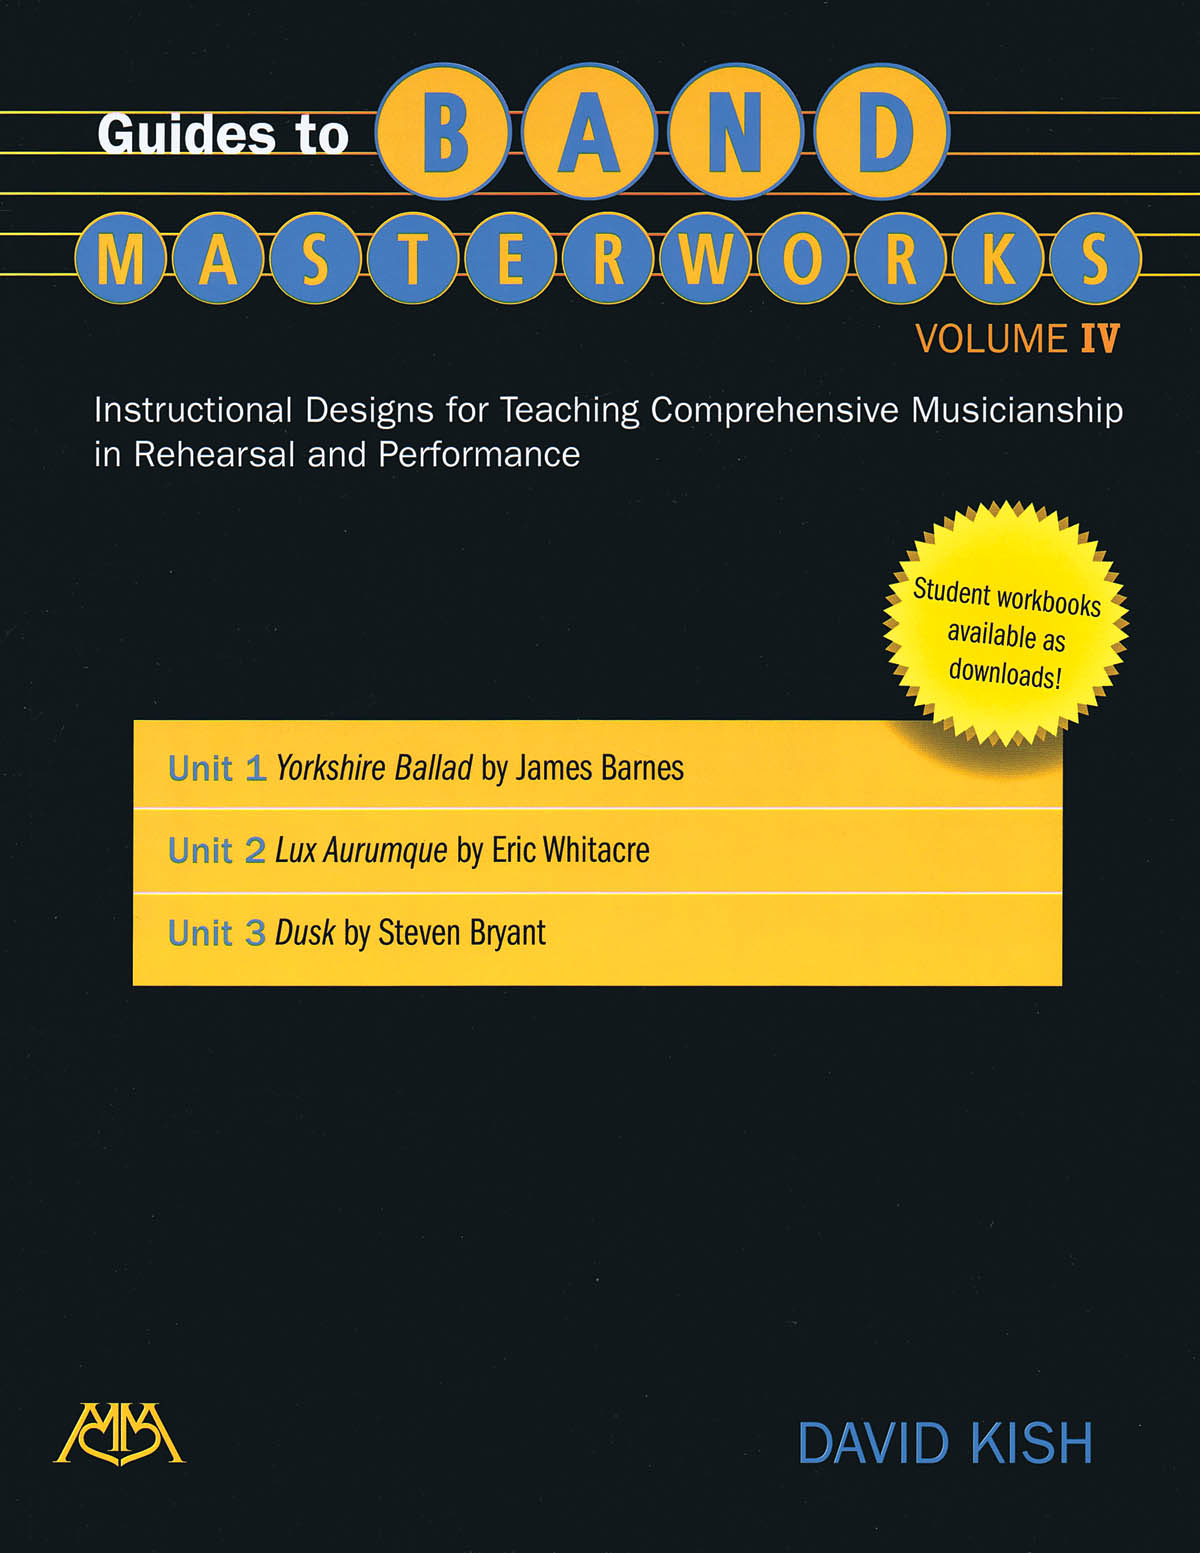 Guides to Band Masterworks - Volume IV - Instructional Designs for Teaching Comprehensive Musicianship